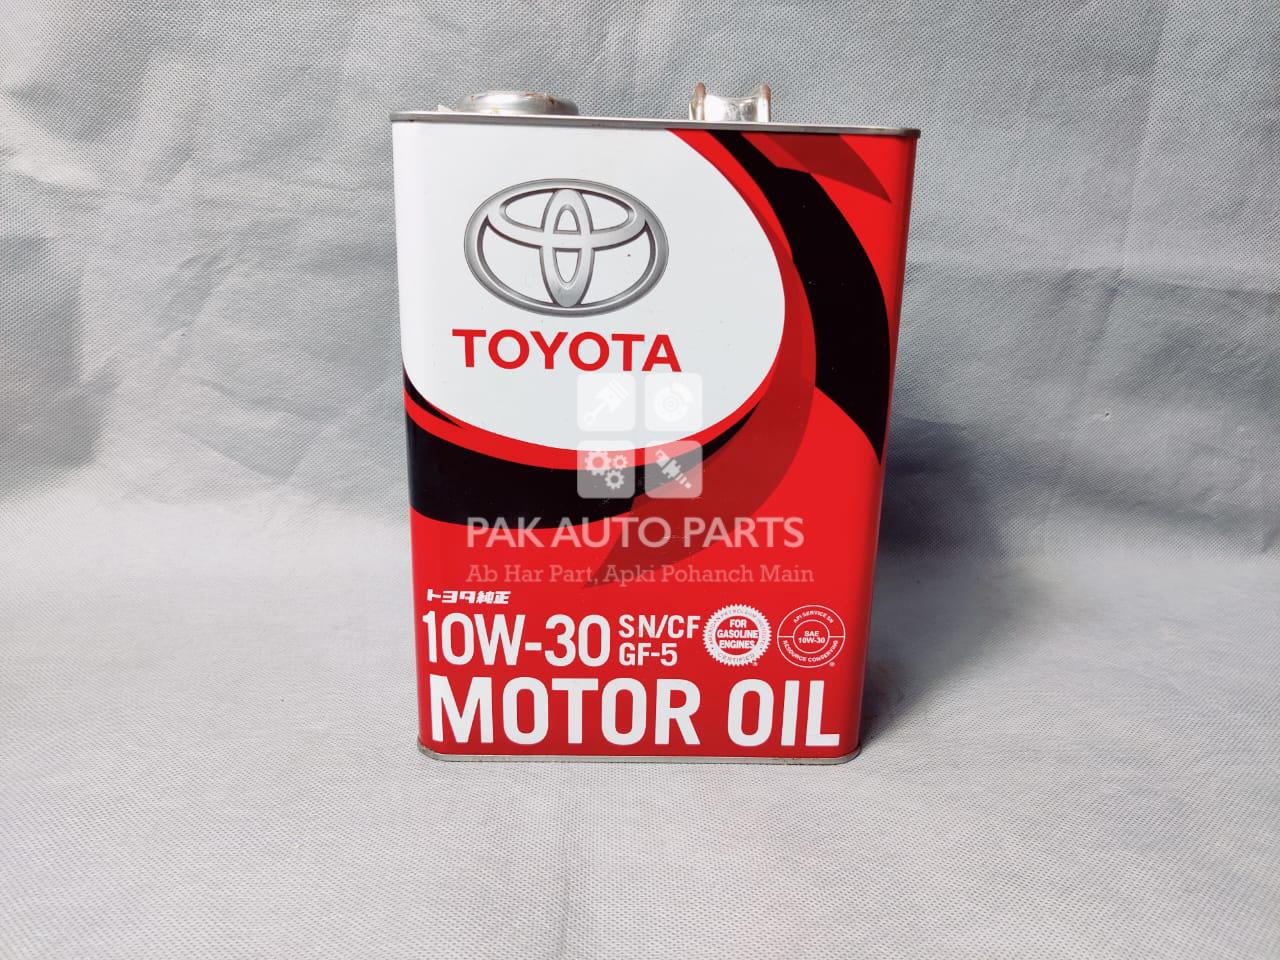 Picture of Toyota 10W-30 Moter Oil